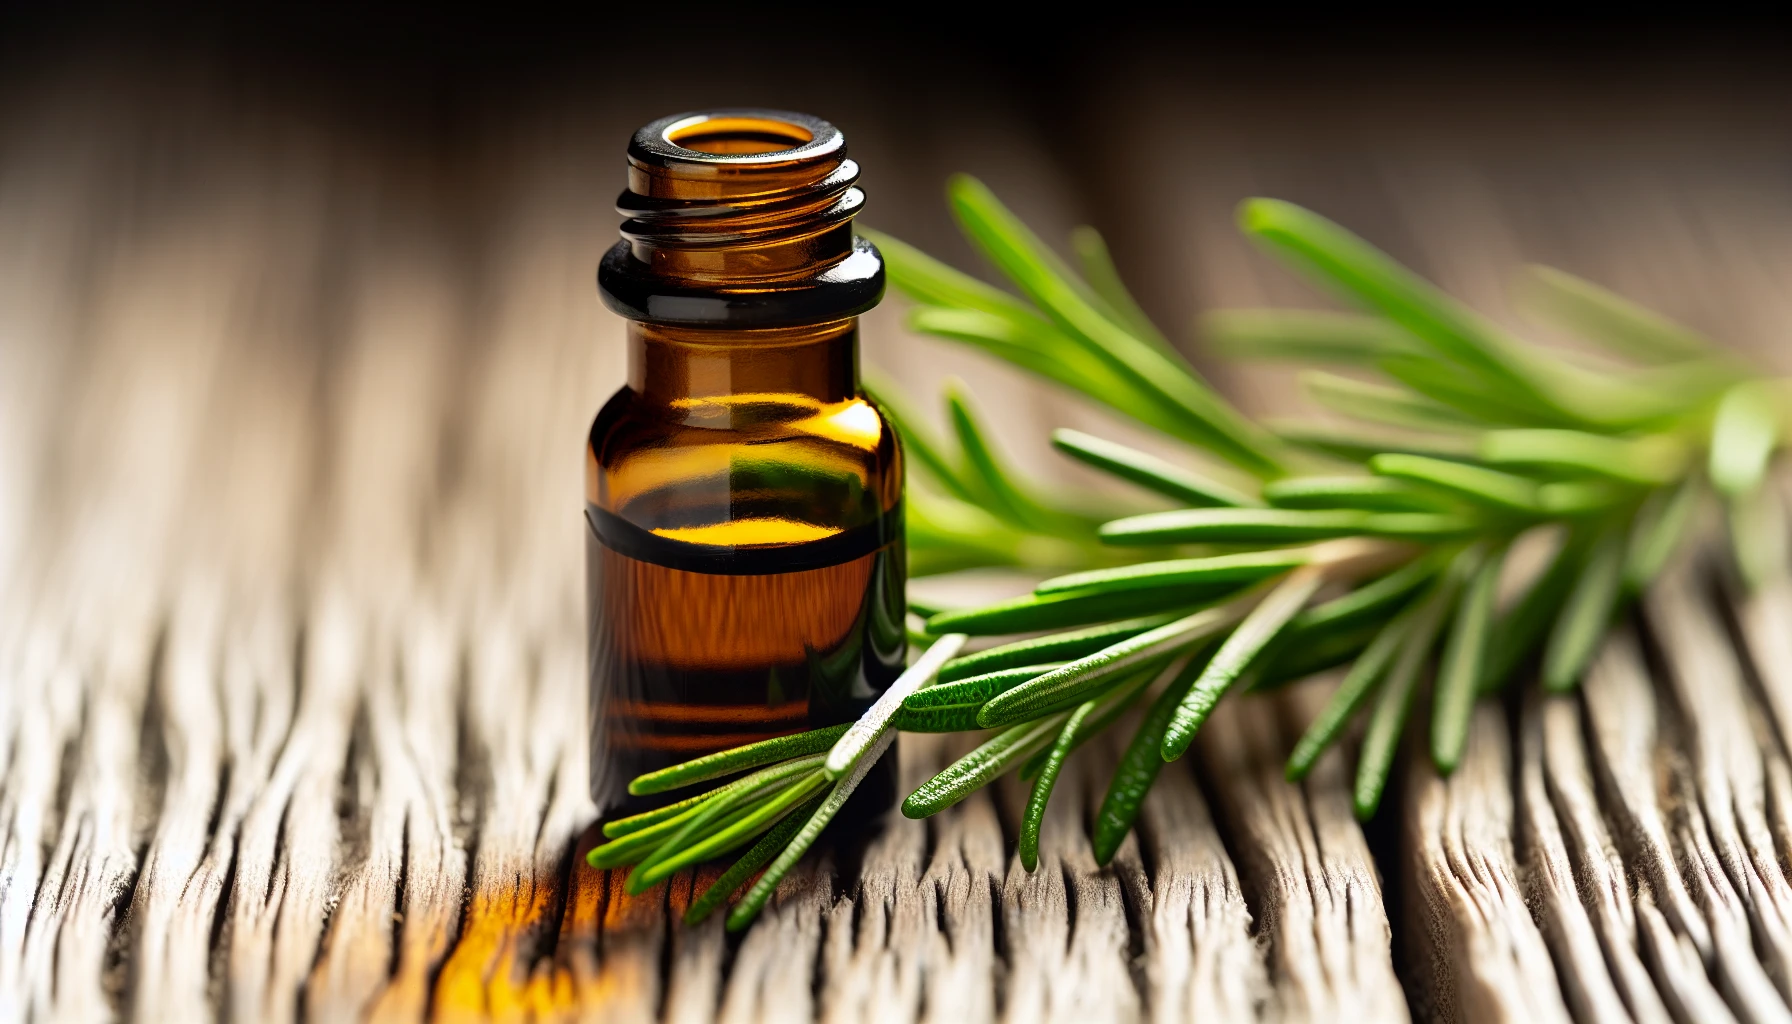 A bottle of rosemary essential oil surrounded by fresh rosemary leaves